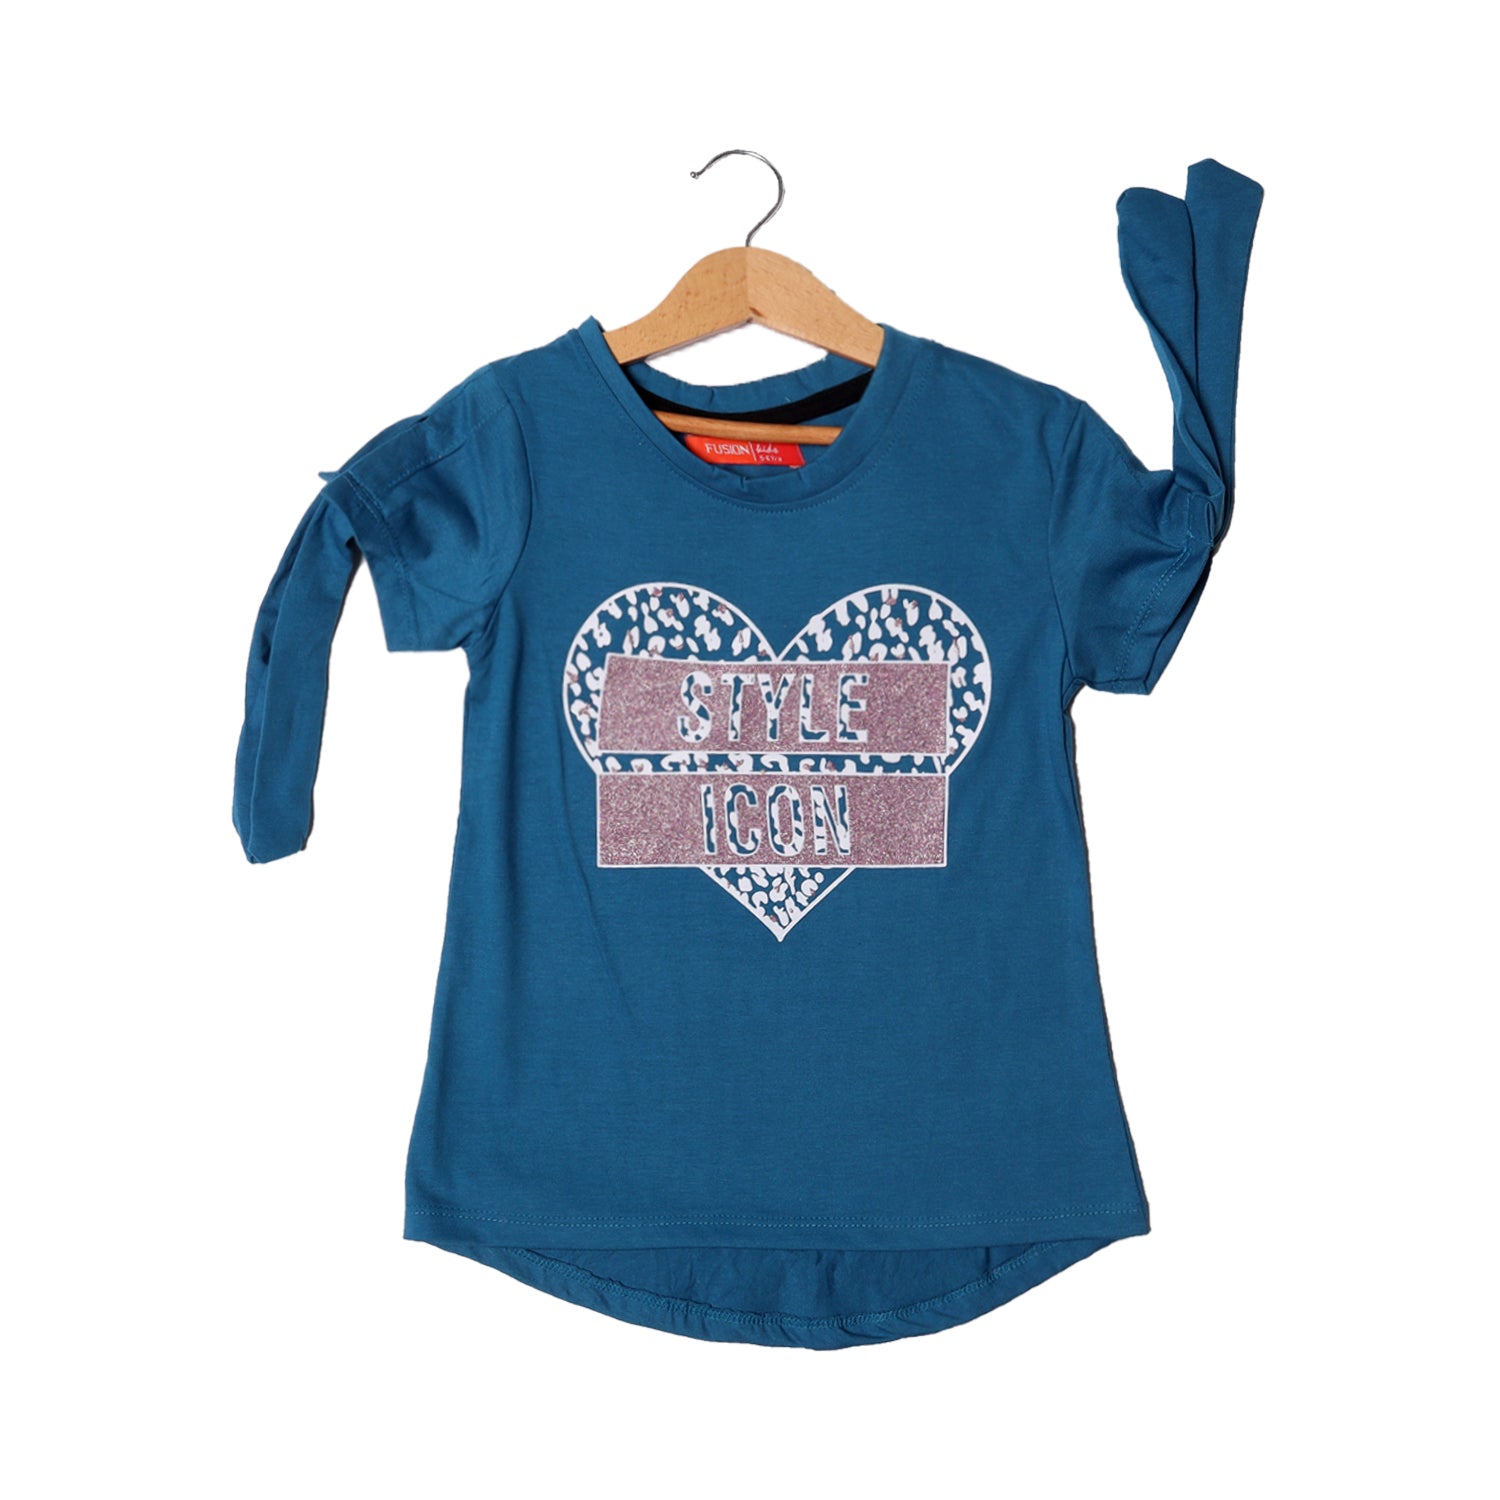 TEAL BLUE HEART STYLE ICON PRINTED T-SHIRT FOR GIRLS